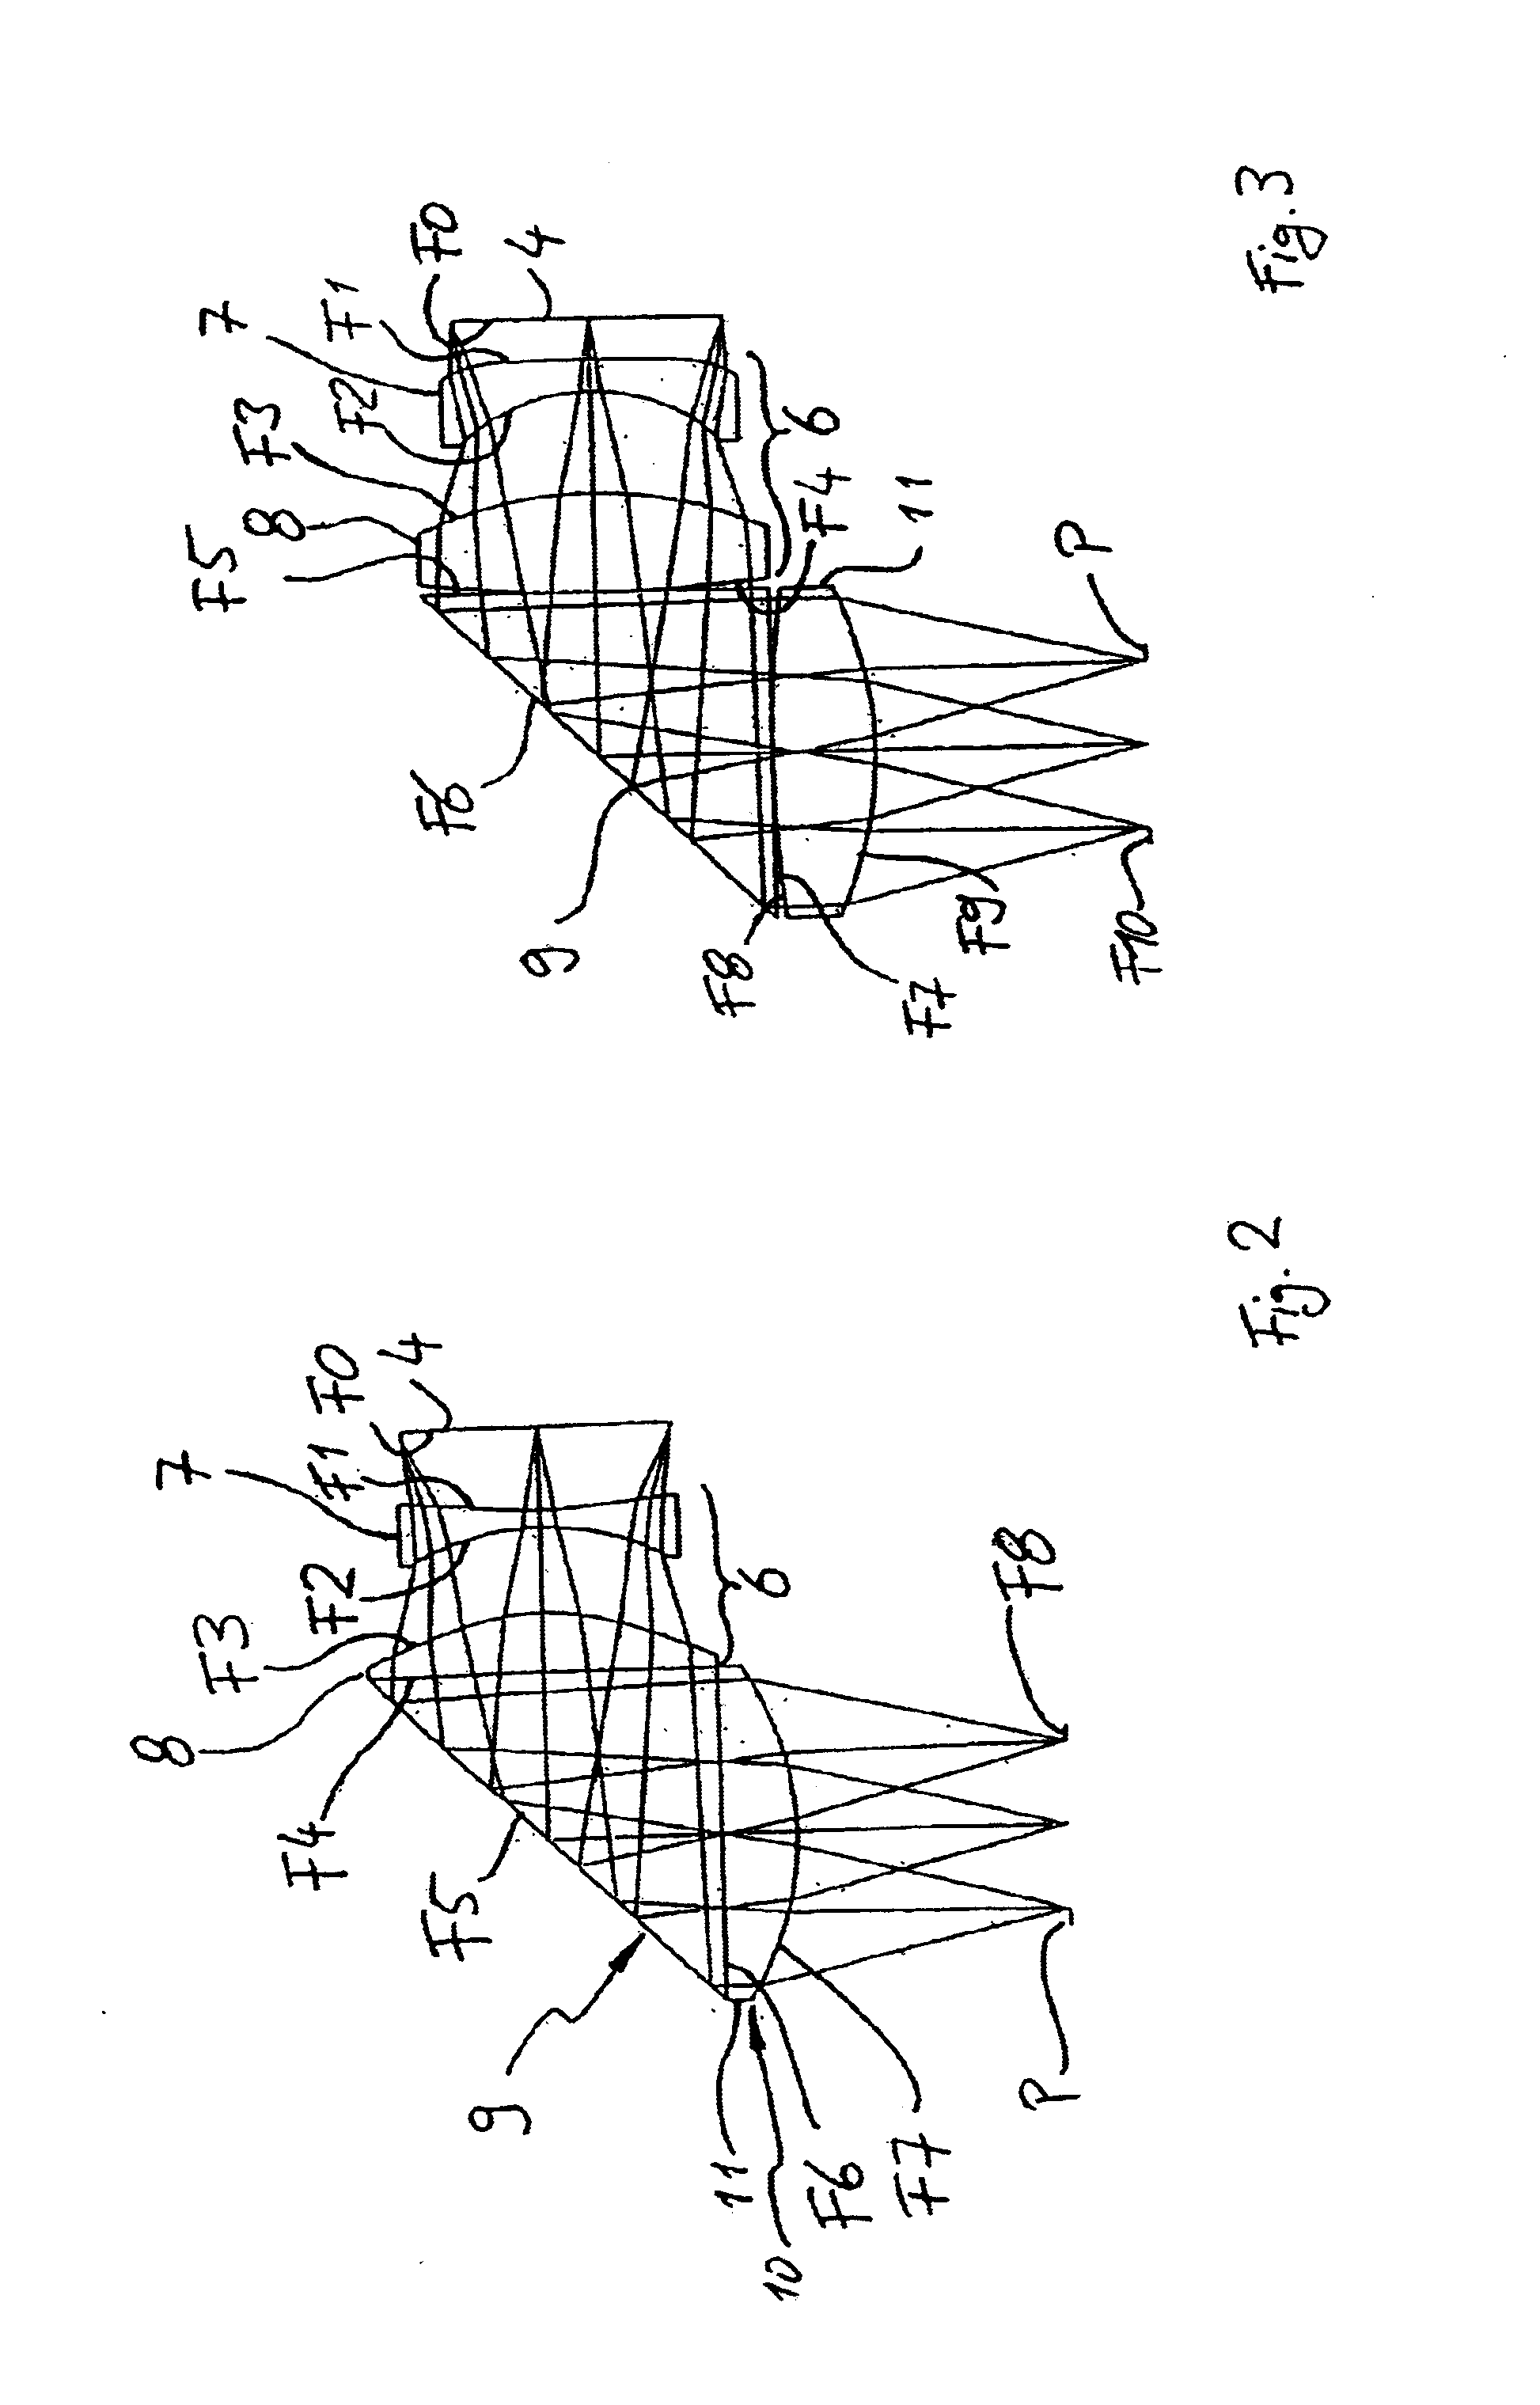 HMD device with imaging optics comprising an aspheric surface